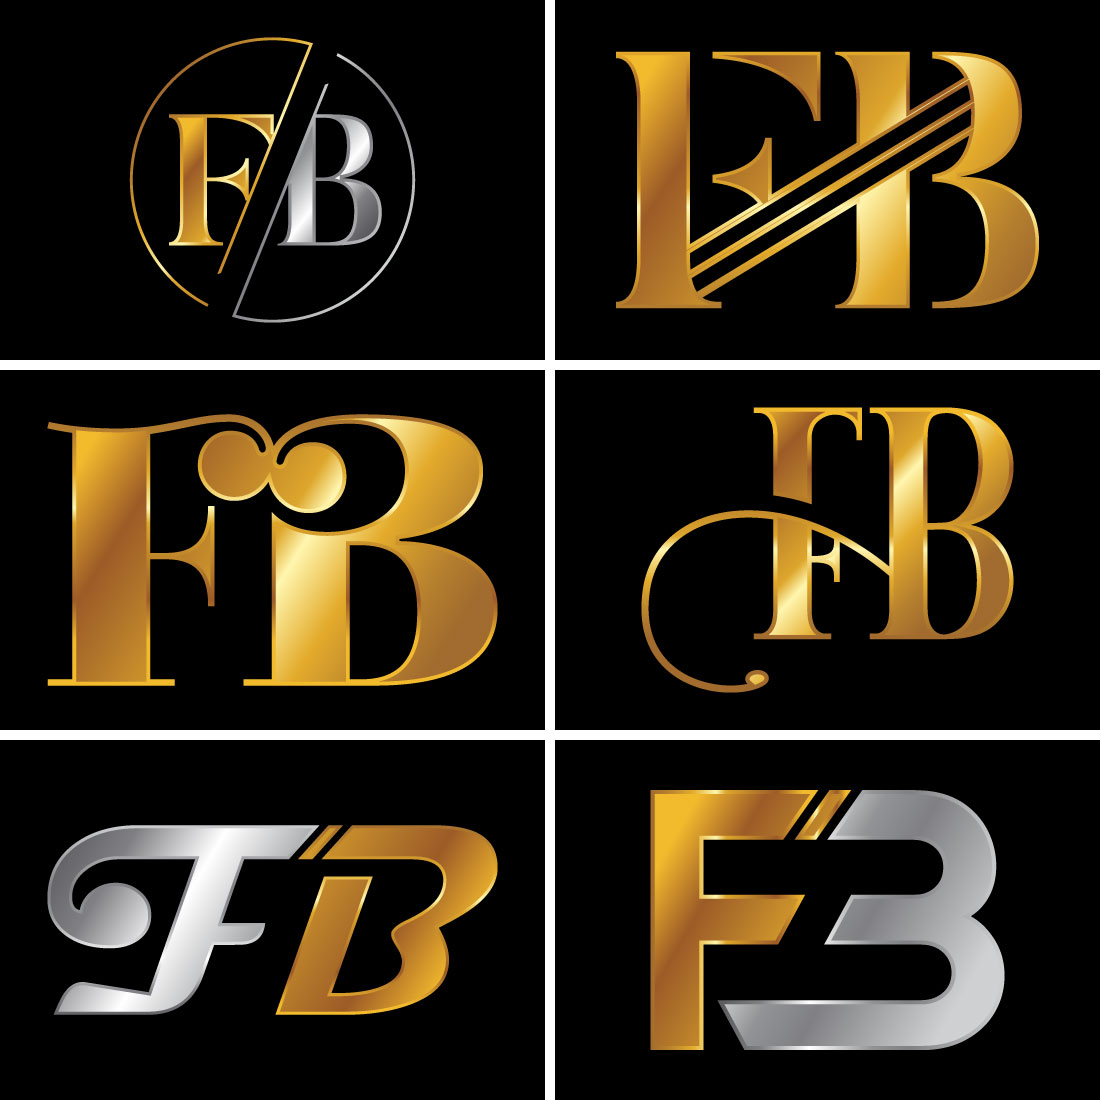 Initial Letter F B Logo Design Vector Template main cover.